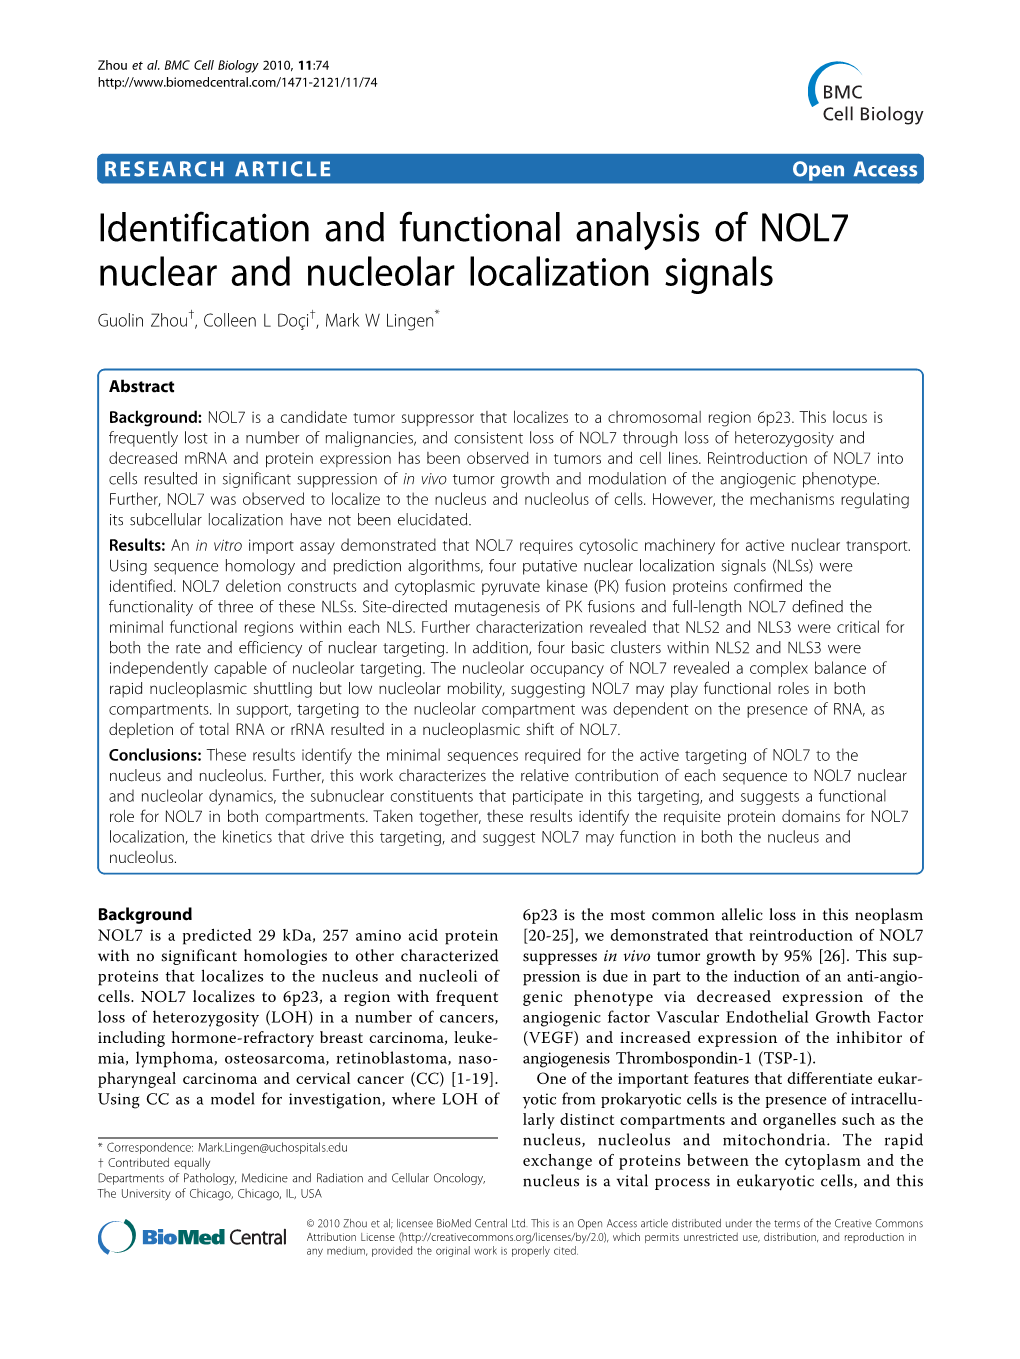 Identification and Functional Analysis of NOL7 Nuclear and Nucleolar Localization Signals Guolin Zhou†, Colleen L Doçi†, Mark W Lingen*